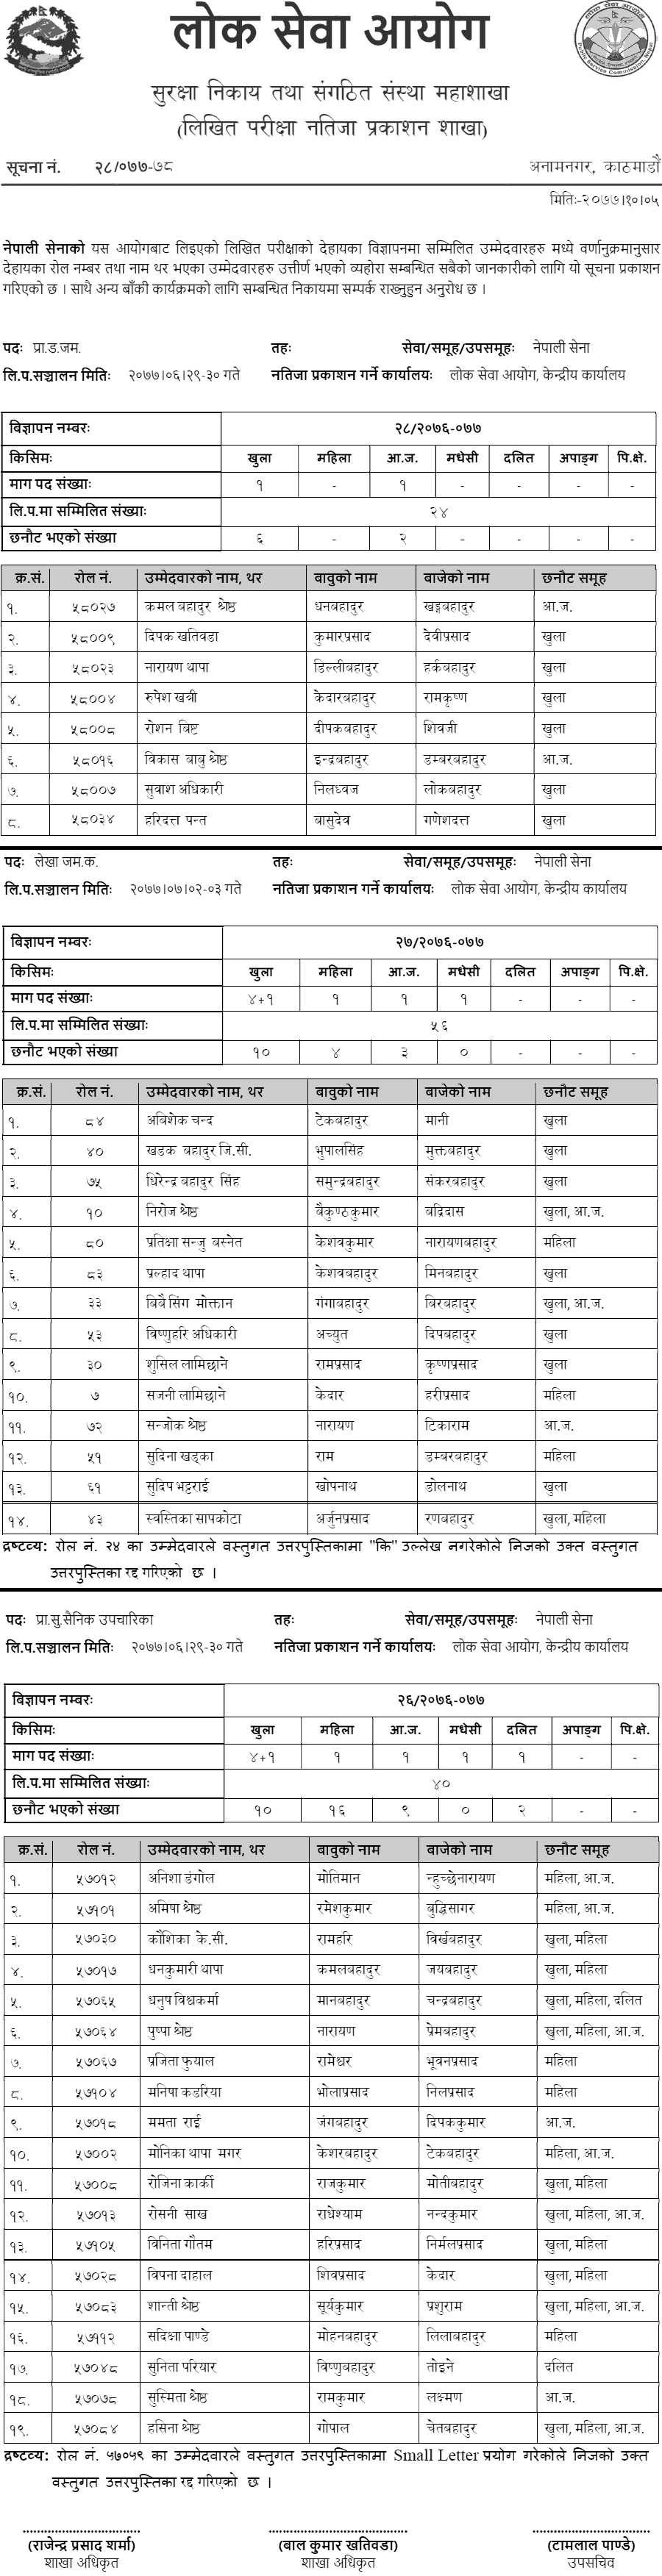 Nepal Army Written Exam Result of Various Positions